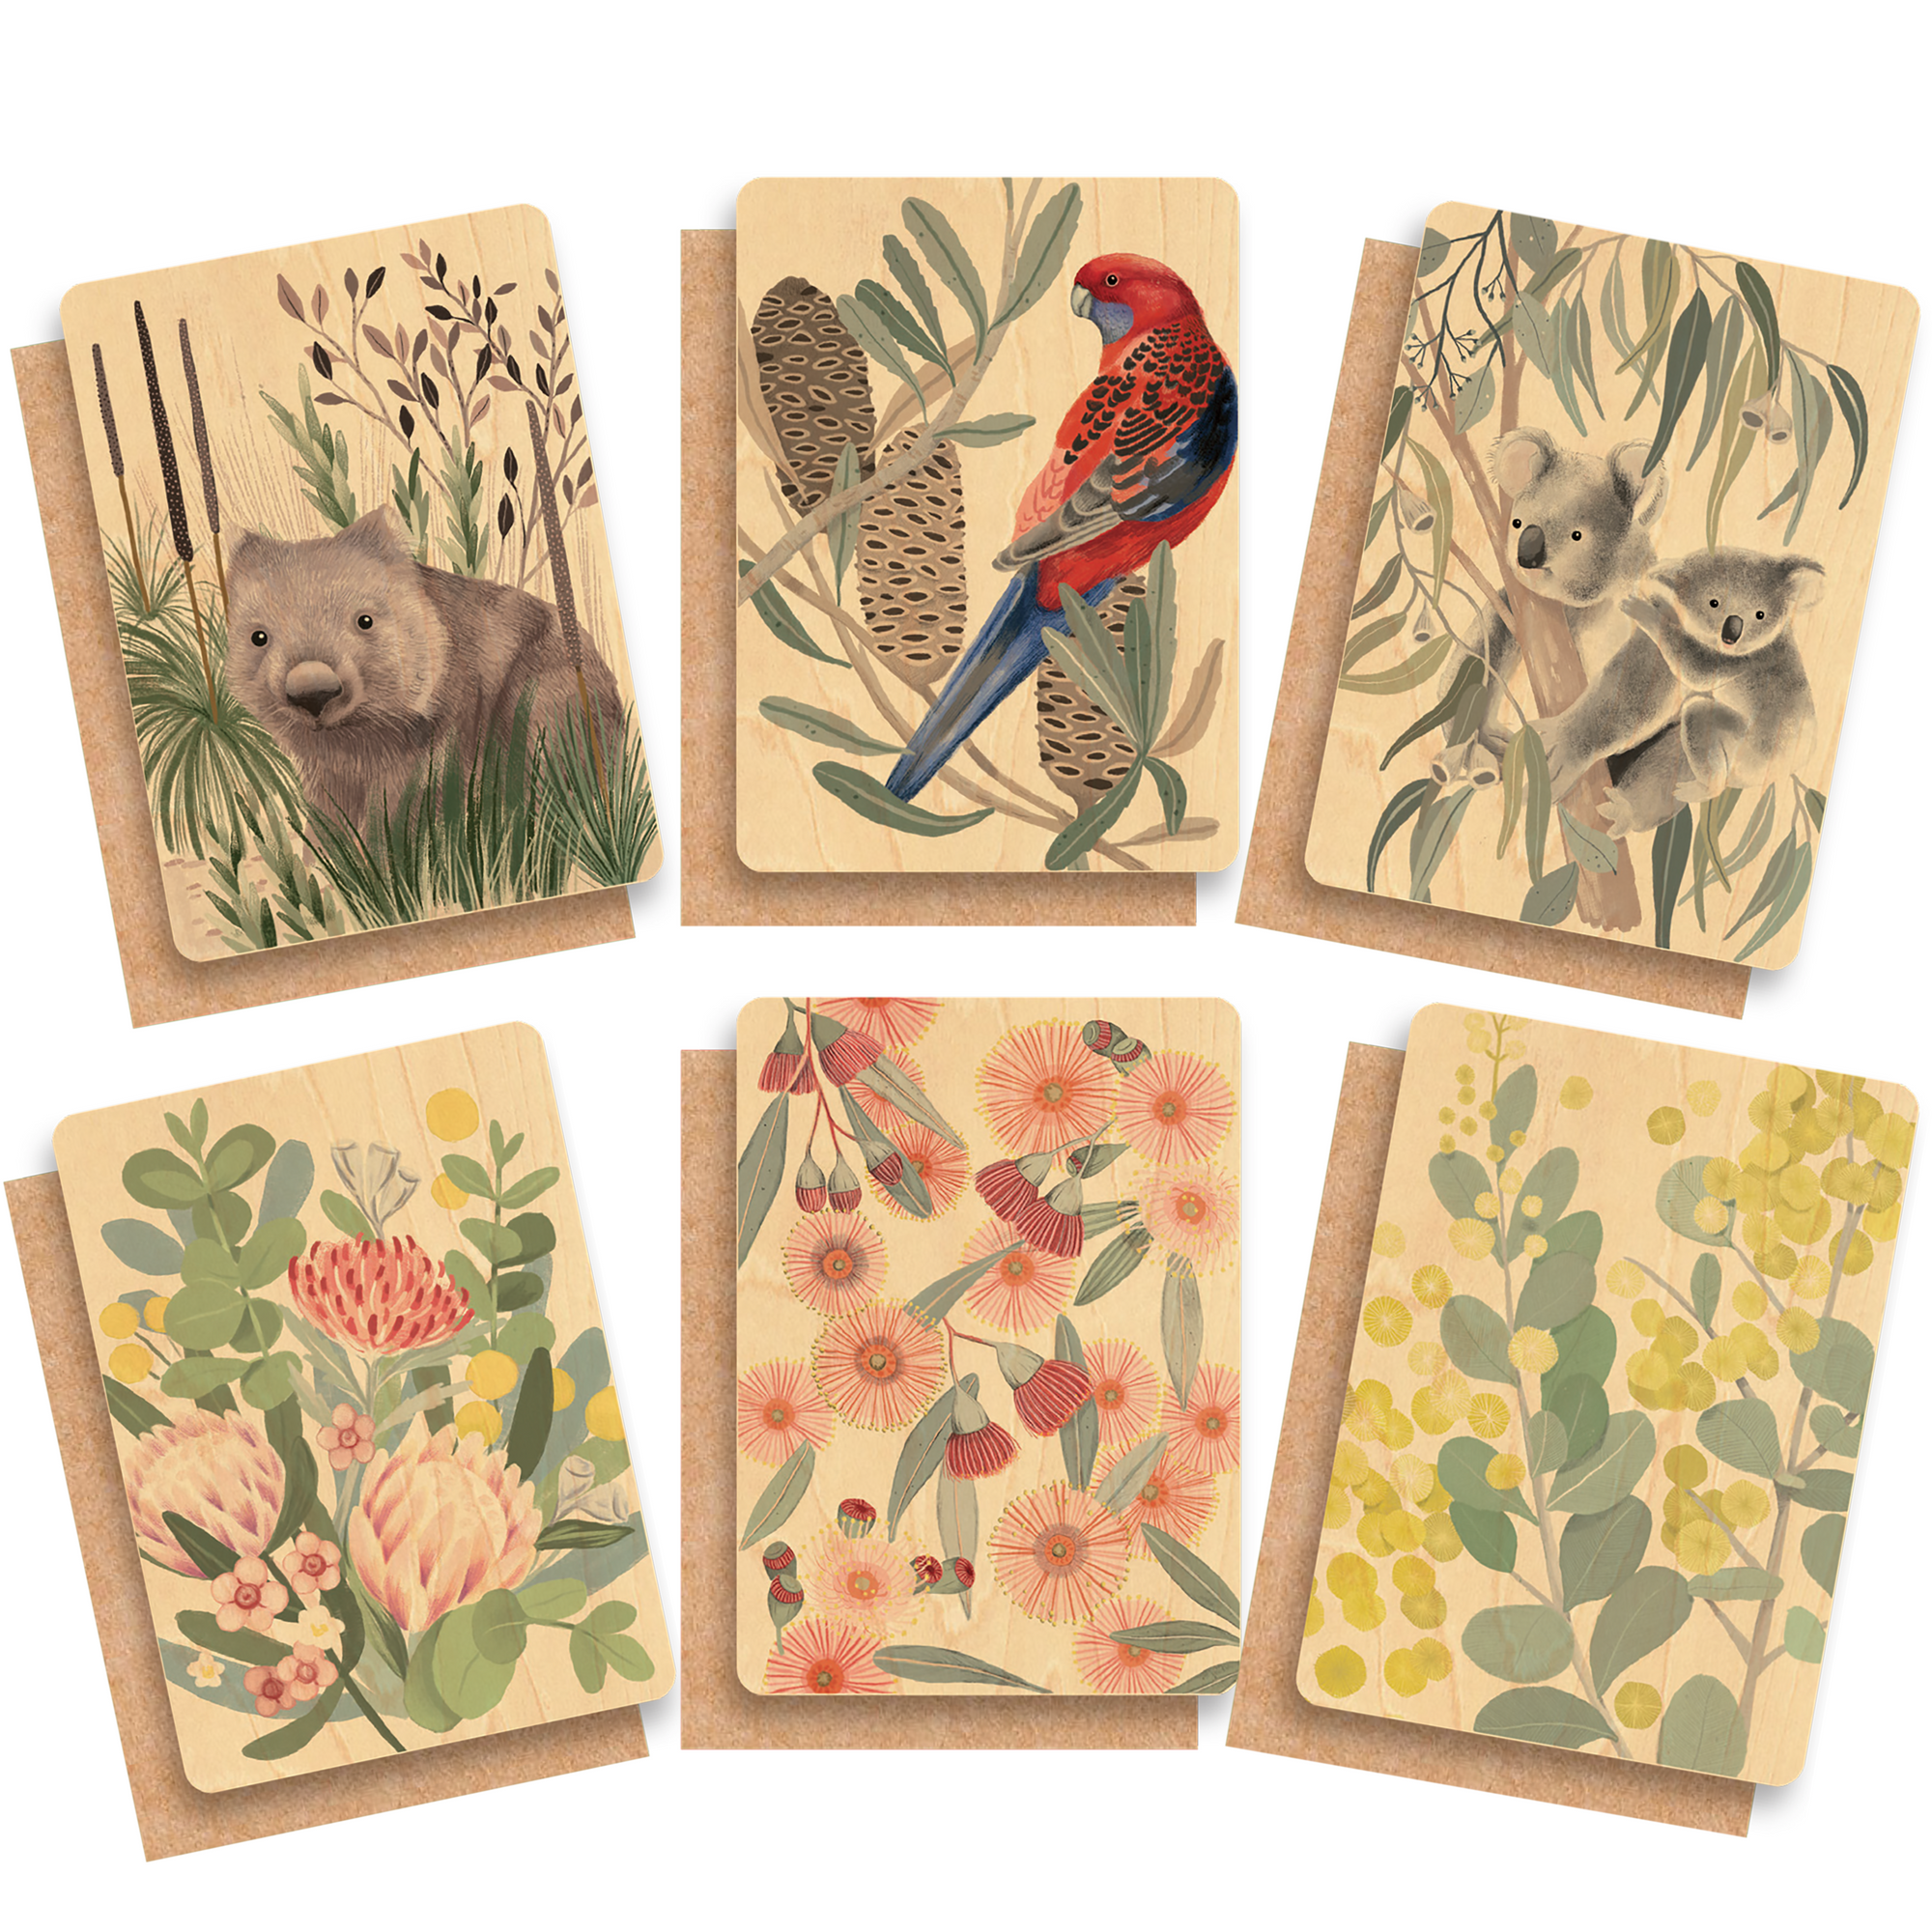 Wood Greeting Cards